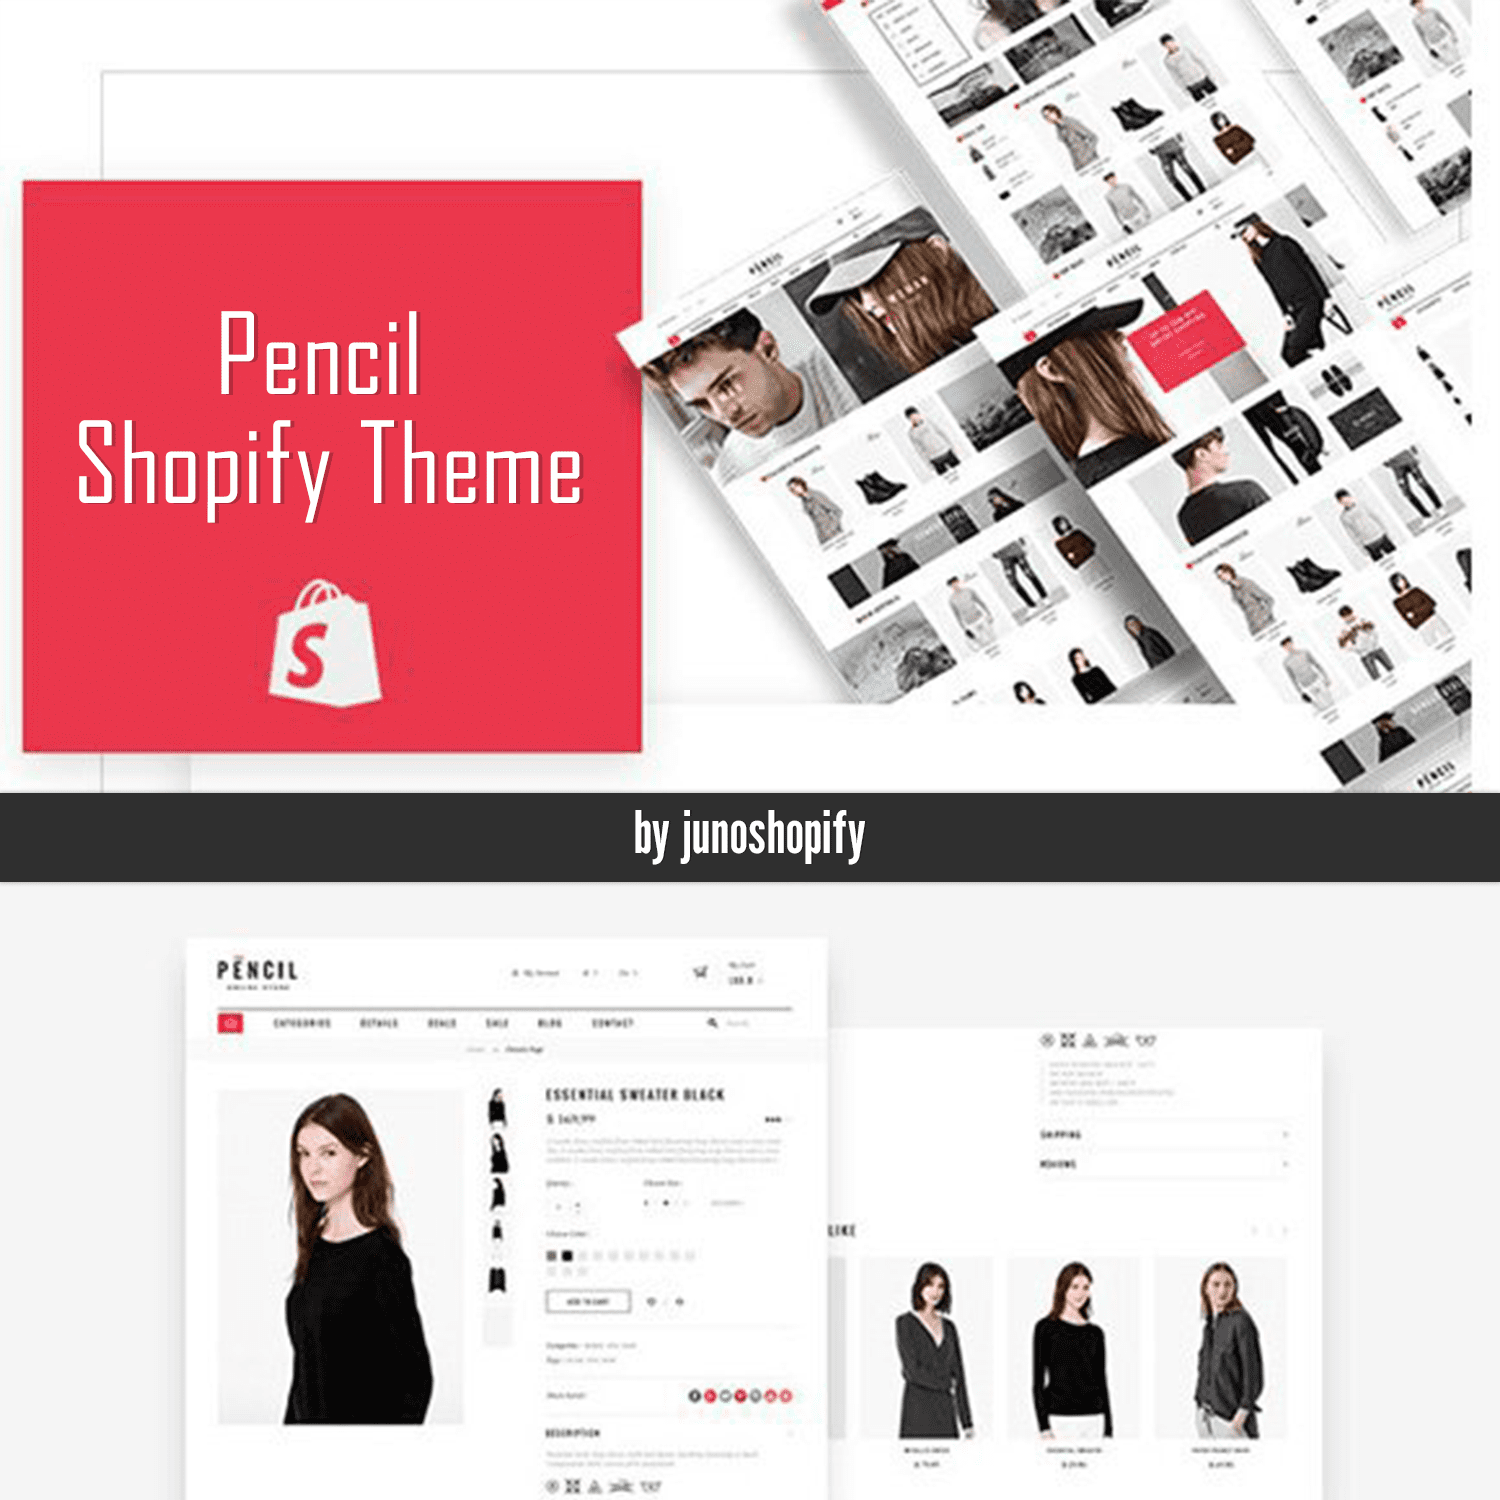 Categories of the Pencil Shopify Theme.